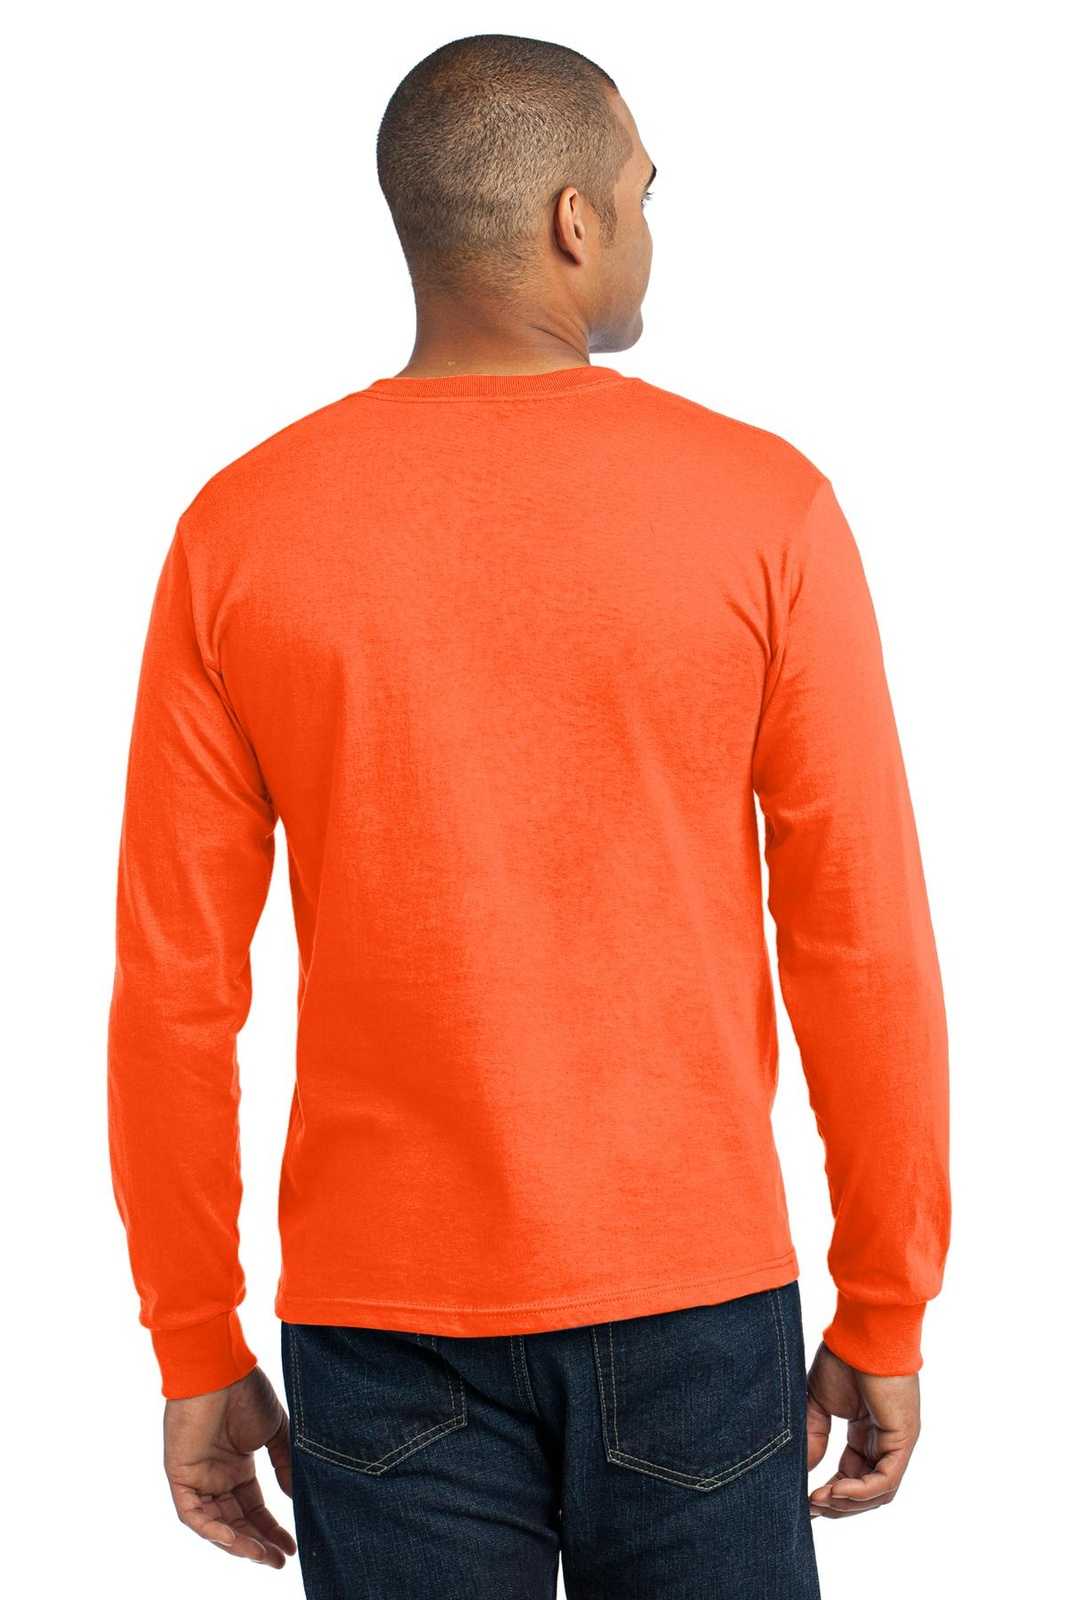 Port & Company USA100LS Long Sleeve All-American Tee - Safety Orange - HIT a Double - 1